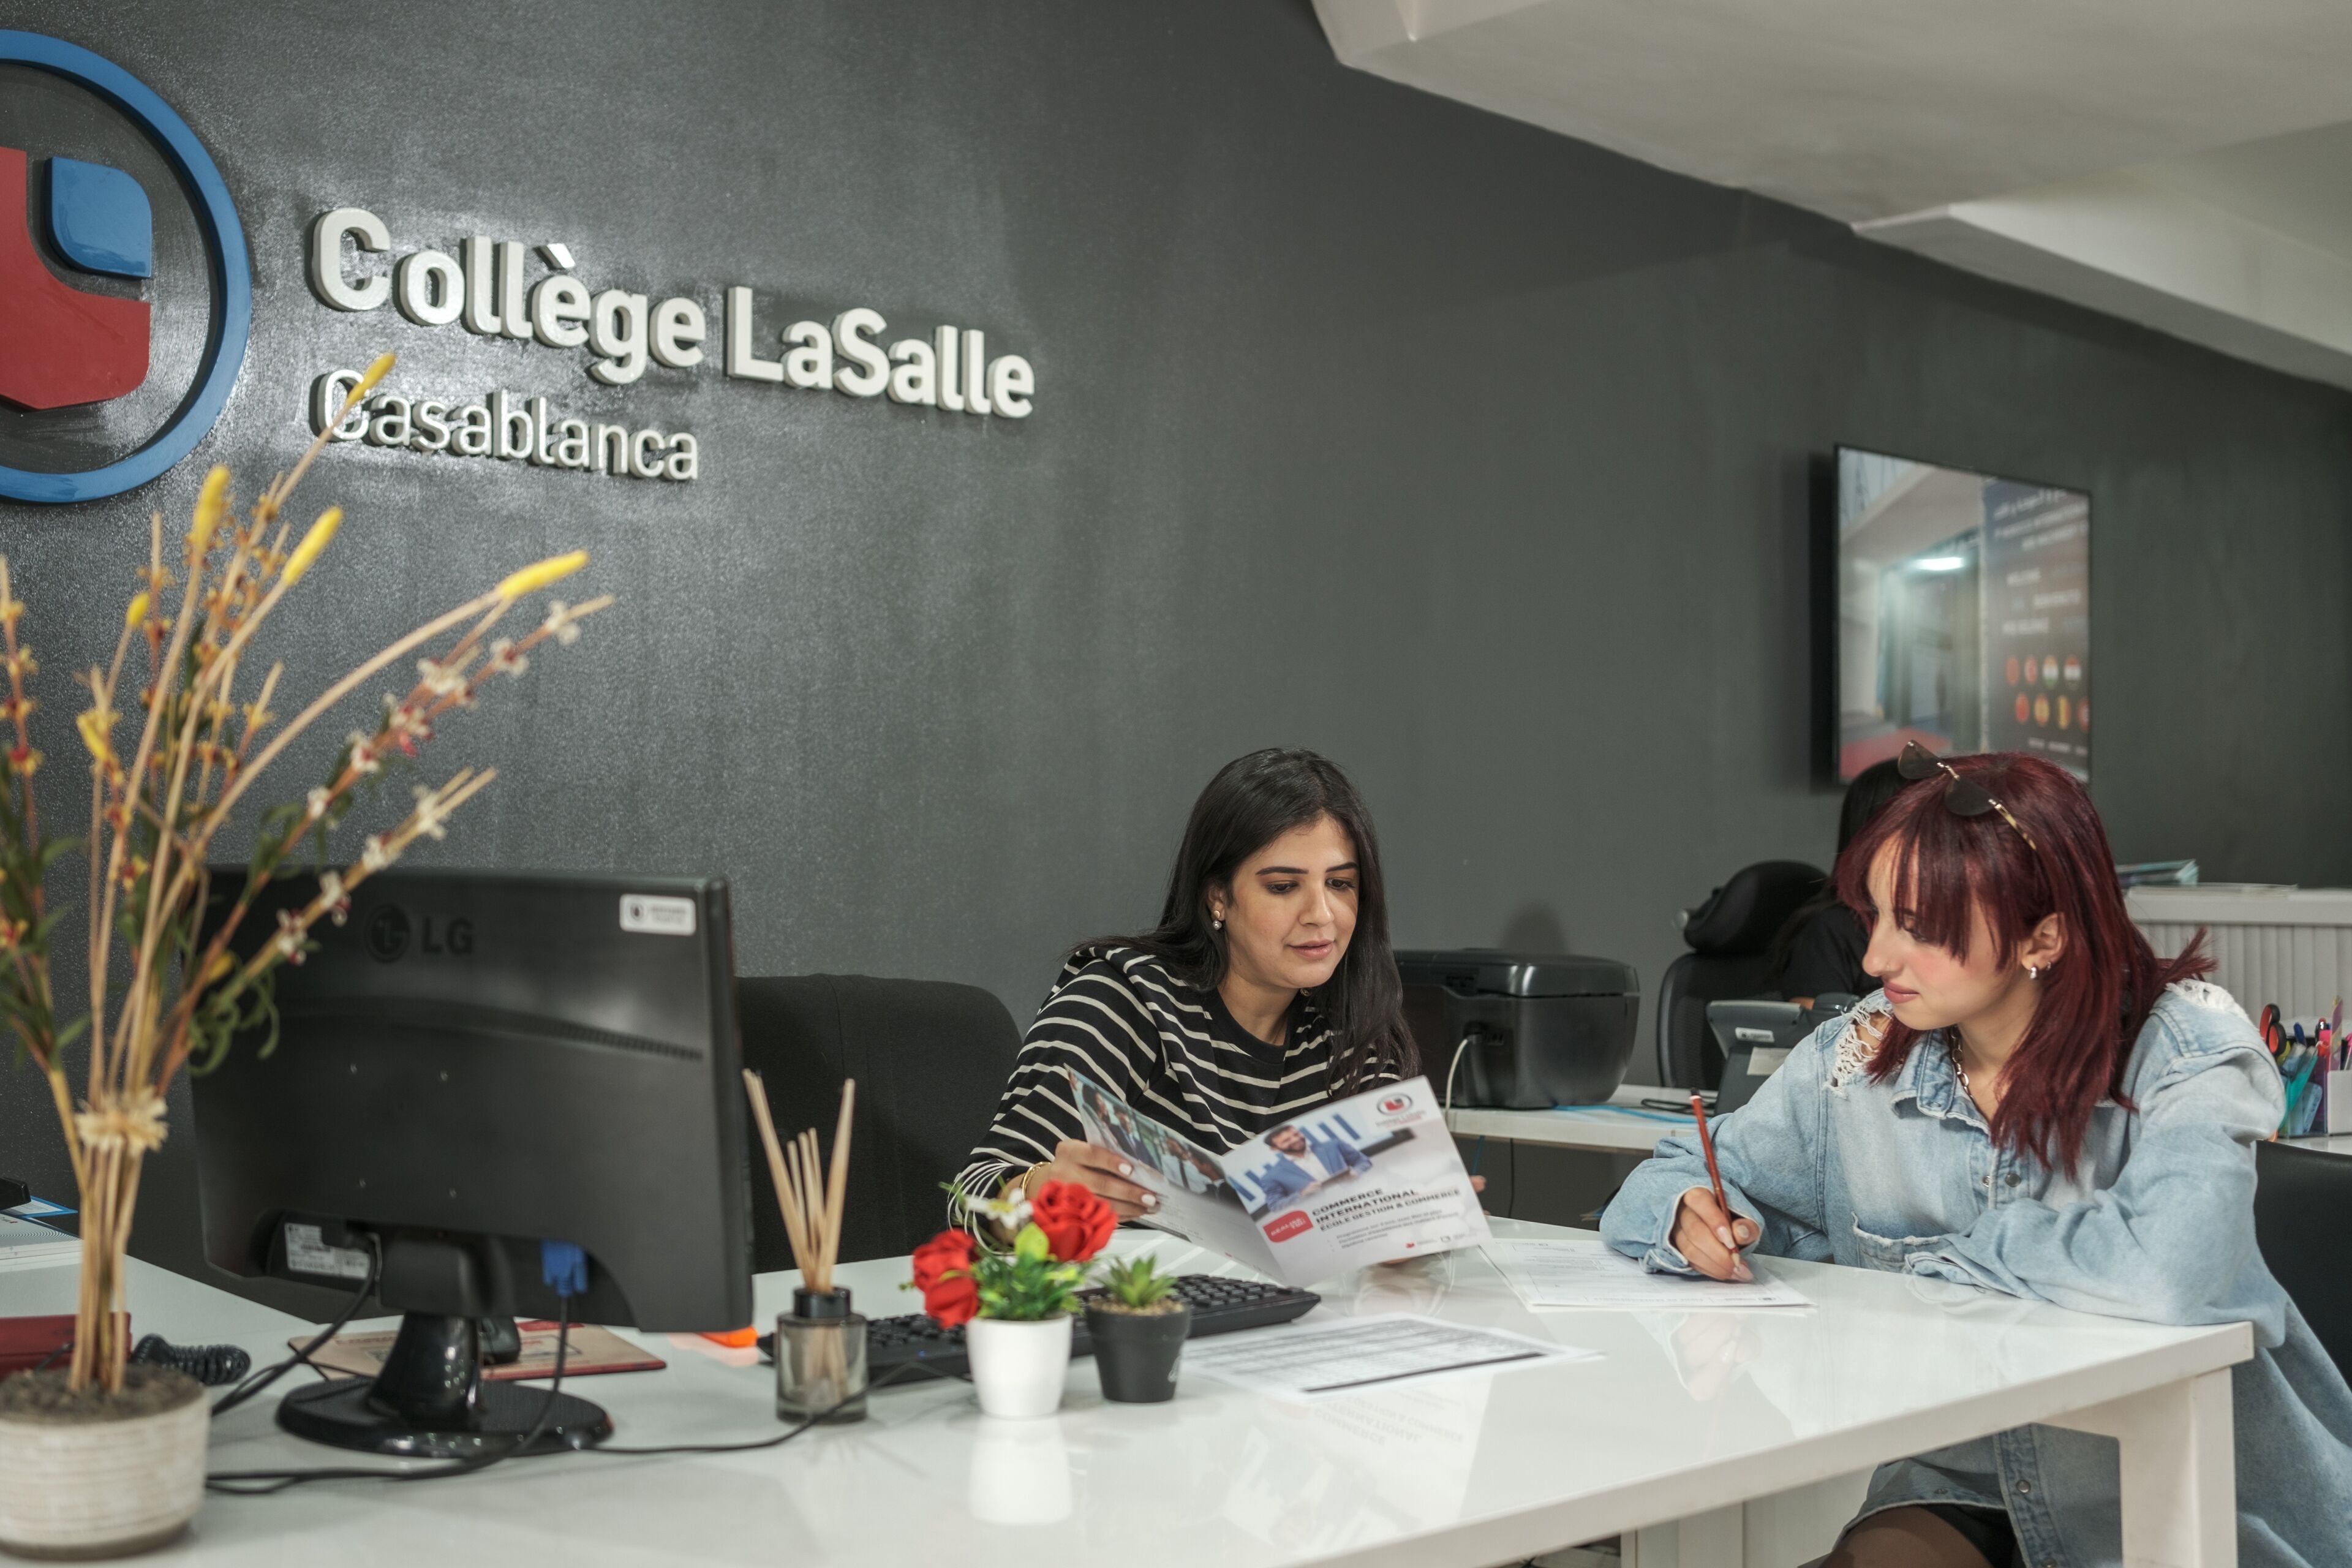 Students discussing educational materials at the Collège LaSalle Casablanca's consultation desk.